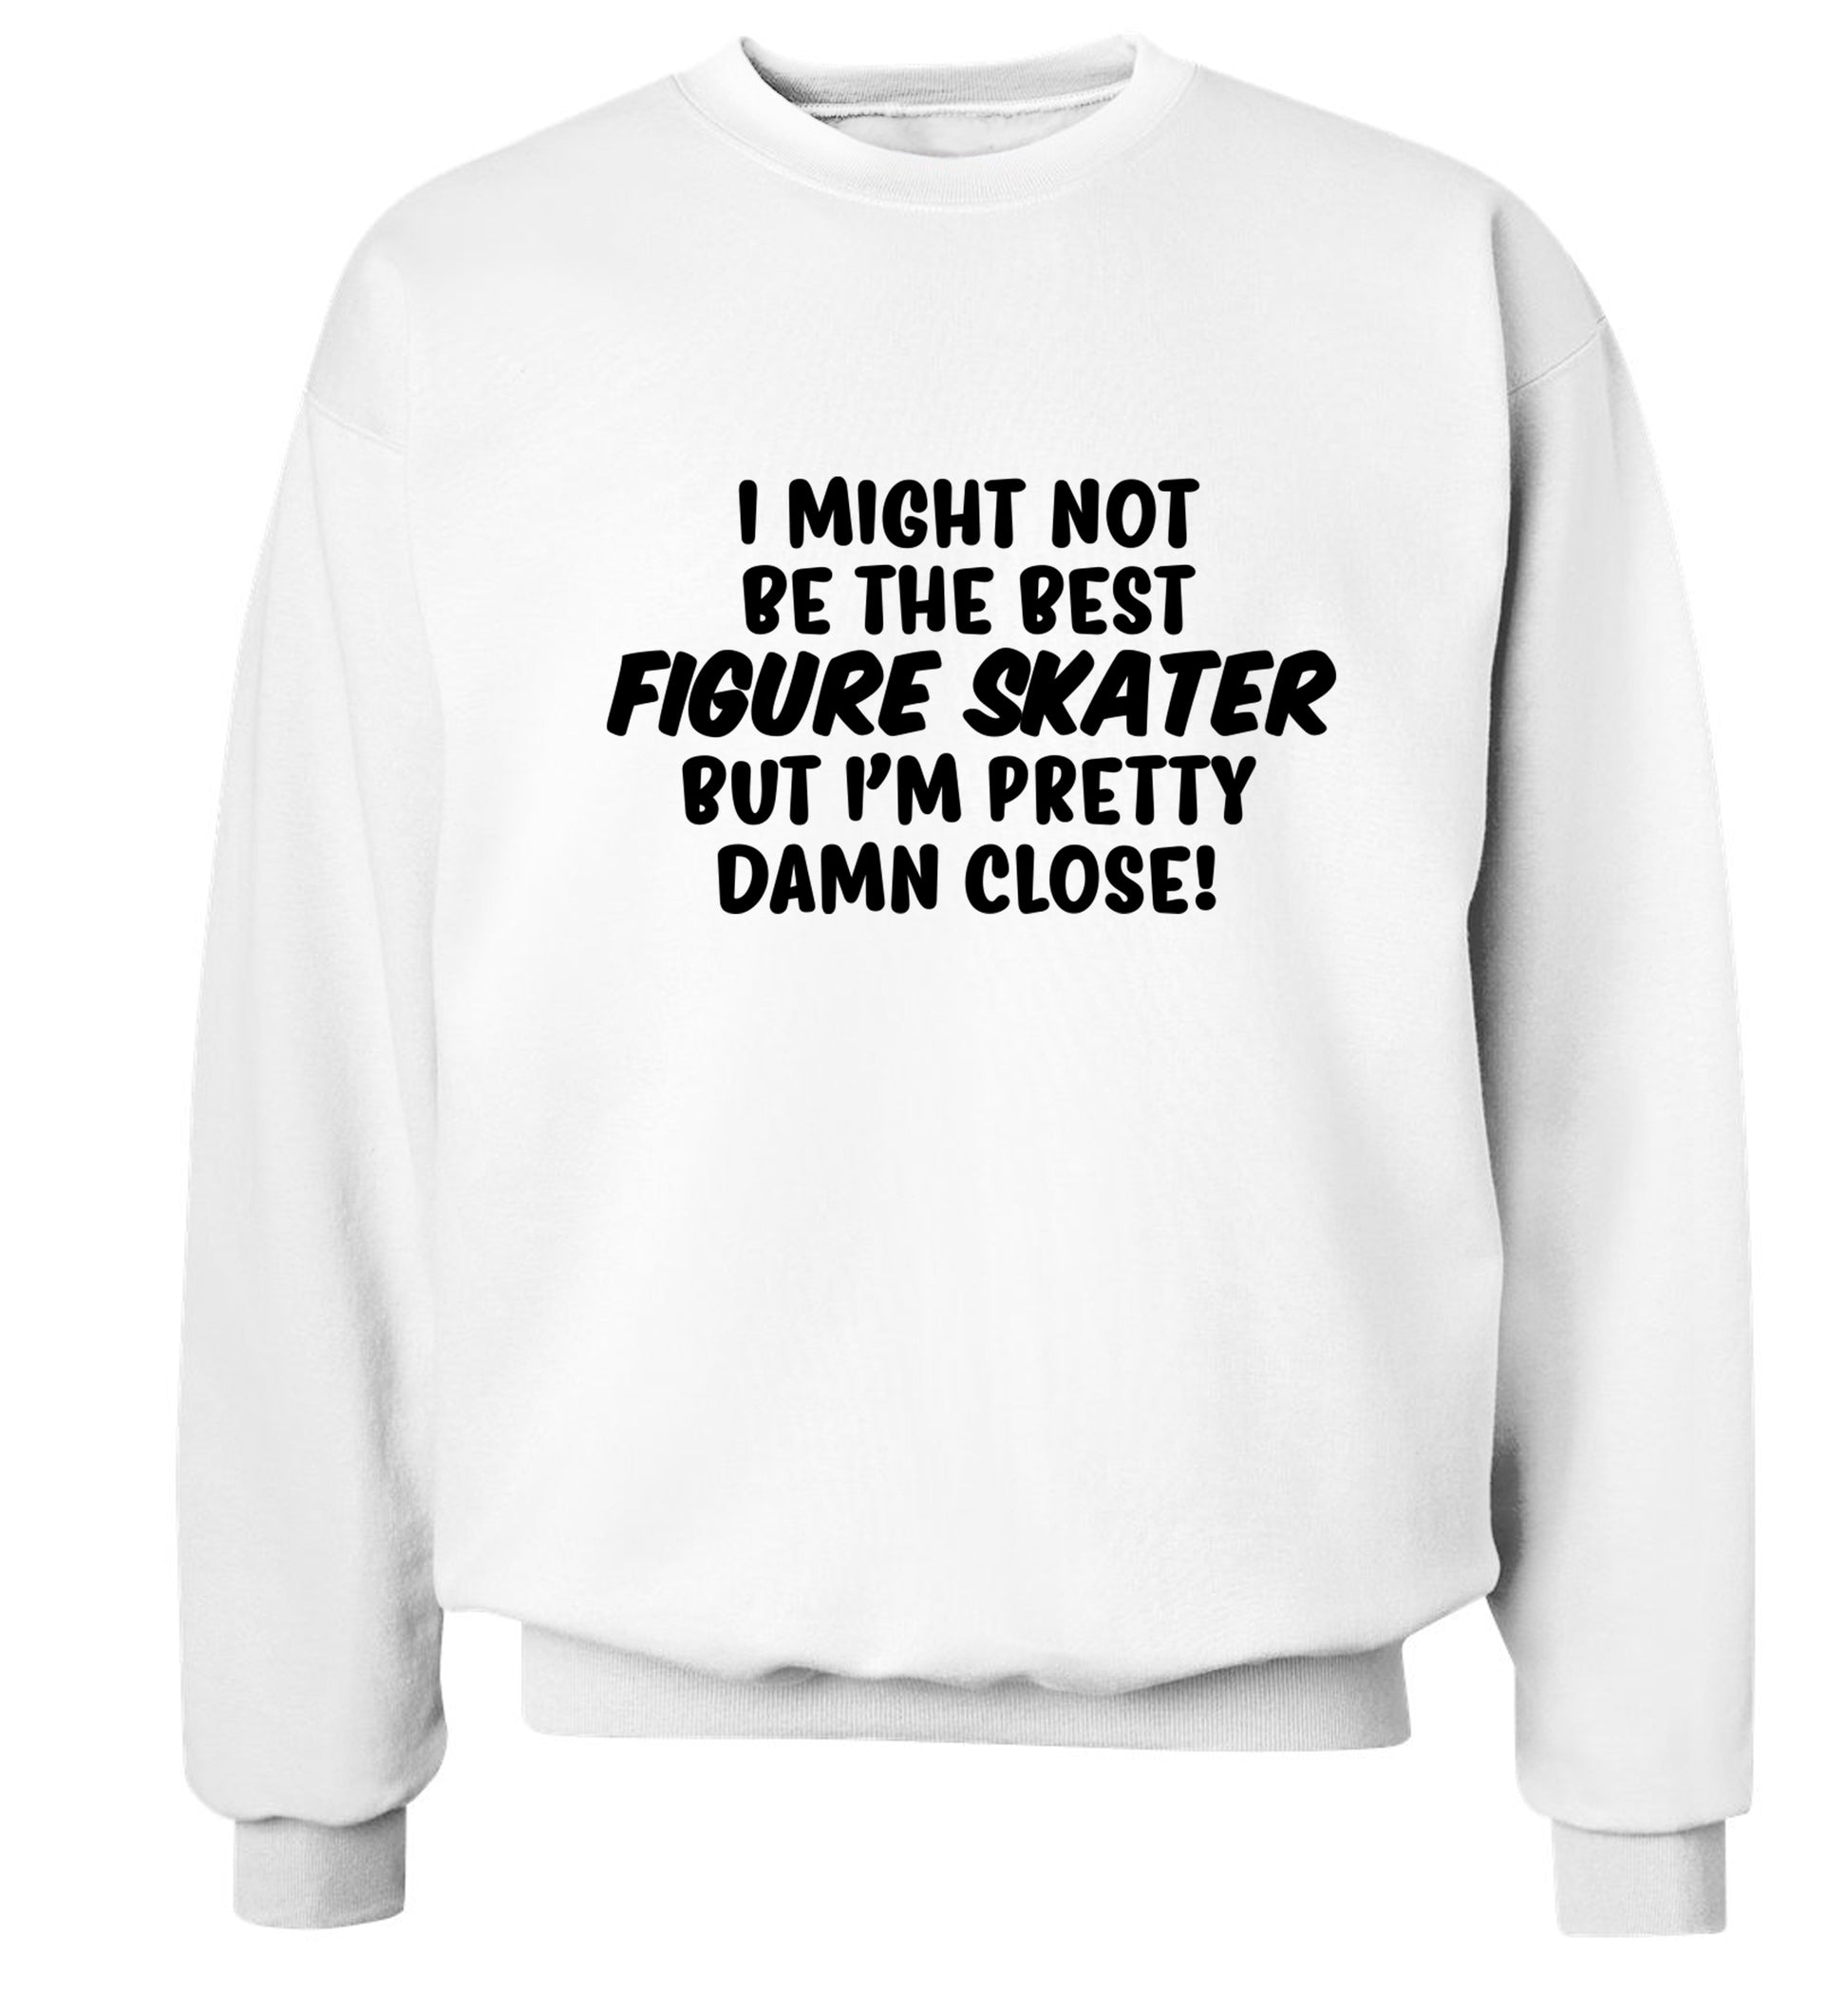 I might not be the best figure skater but I'm pretty damn close! Adult's unisexwhite Sweater 2XL